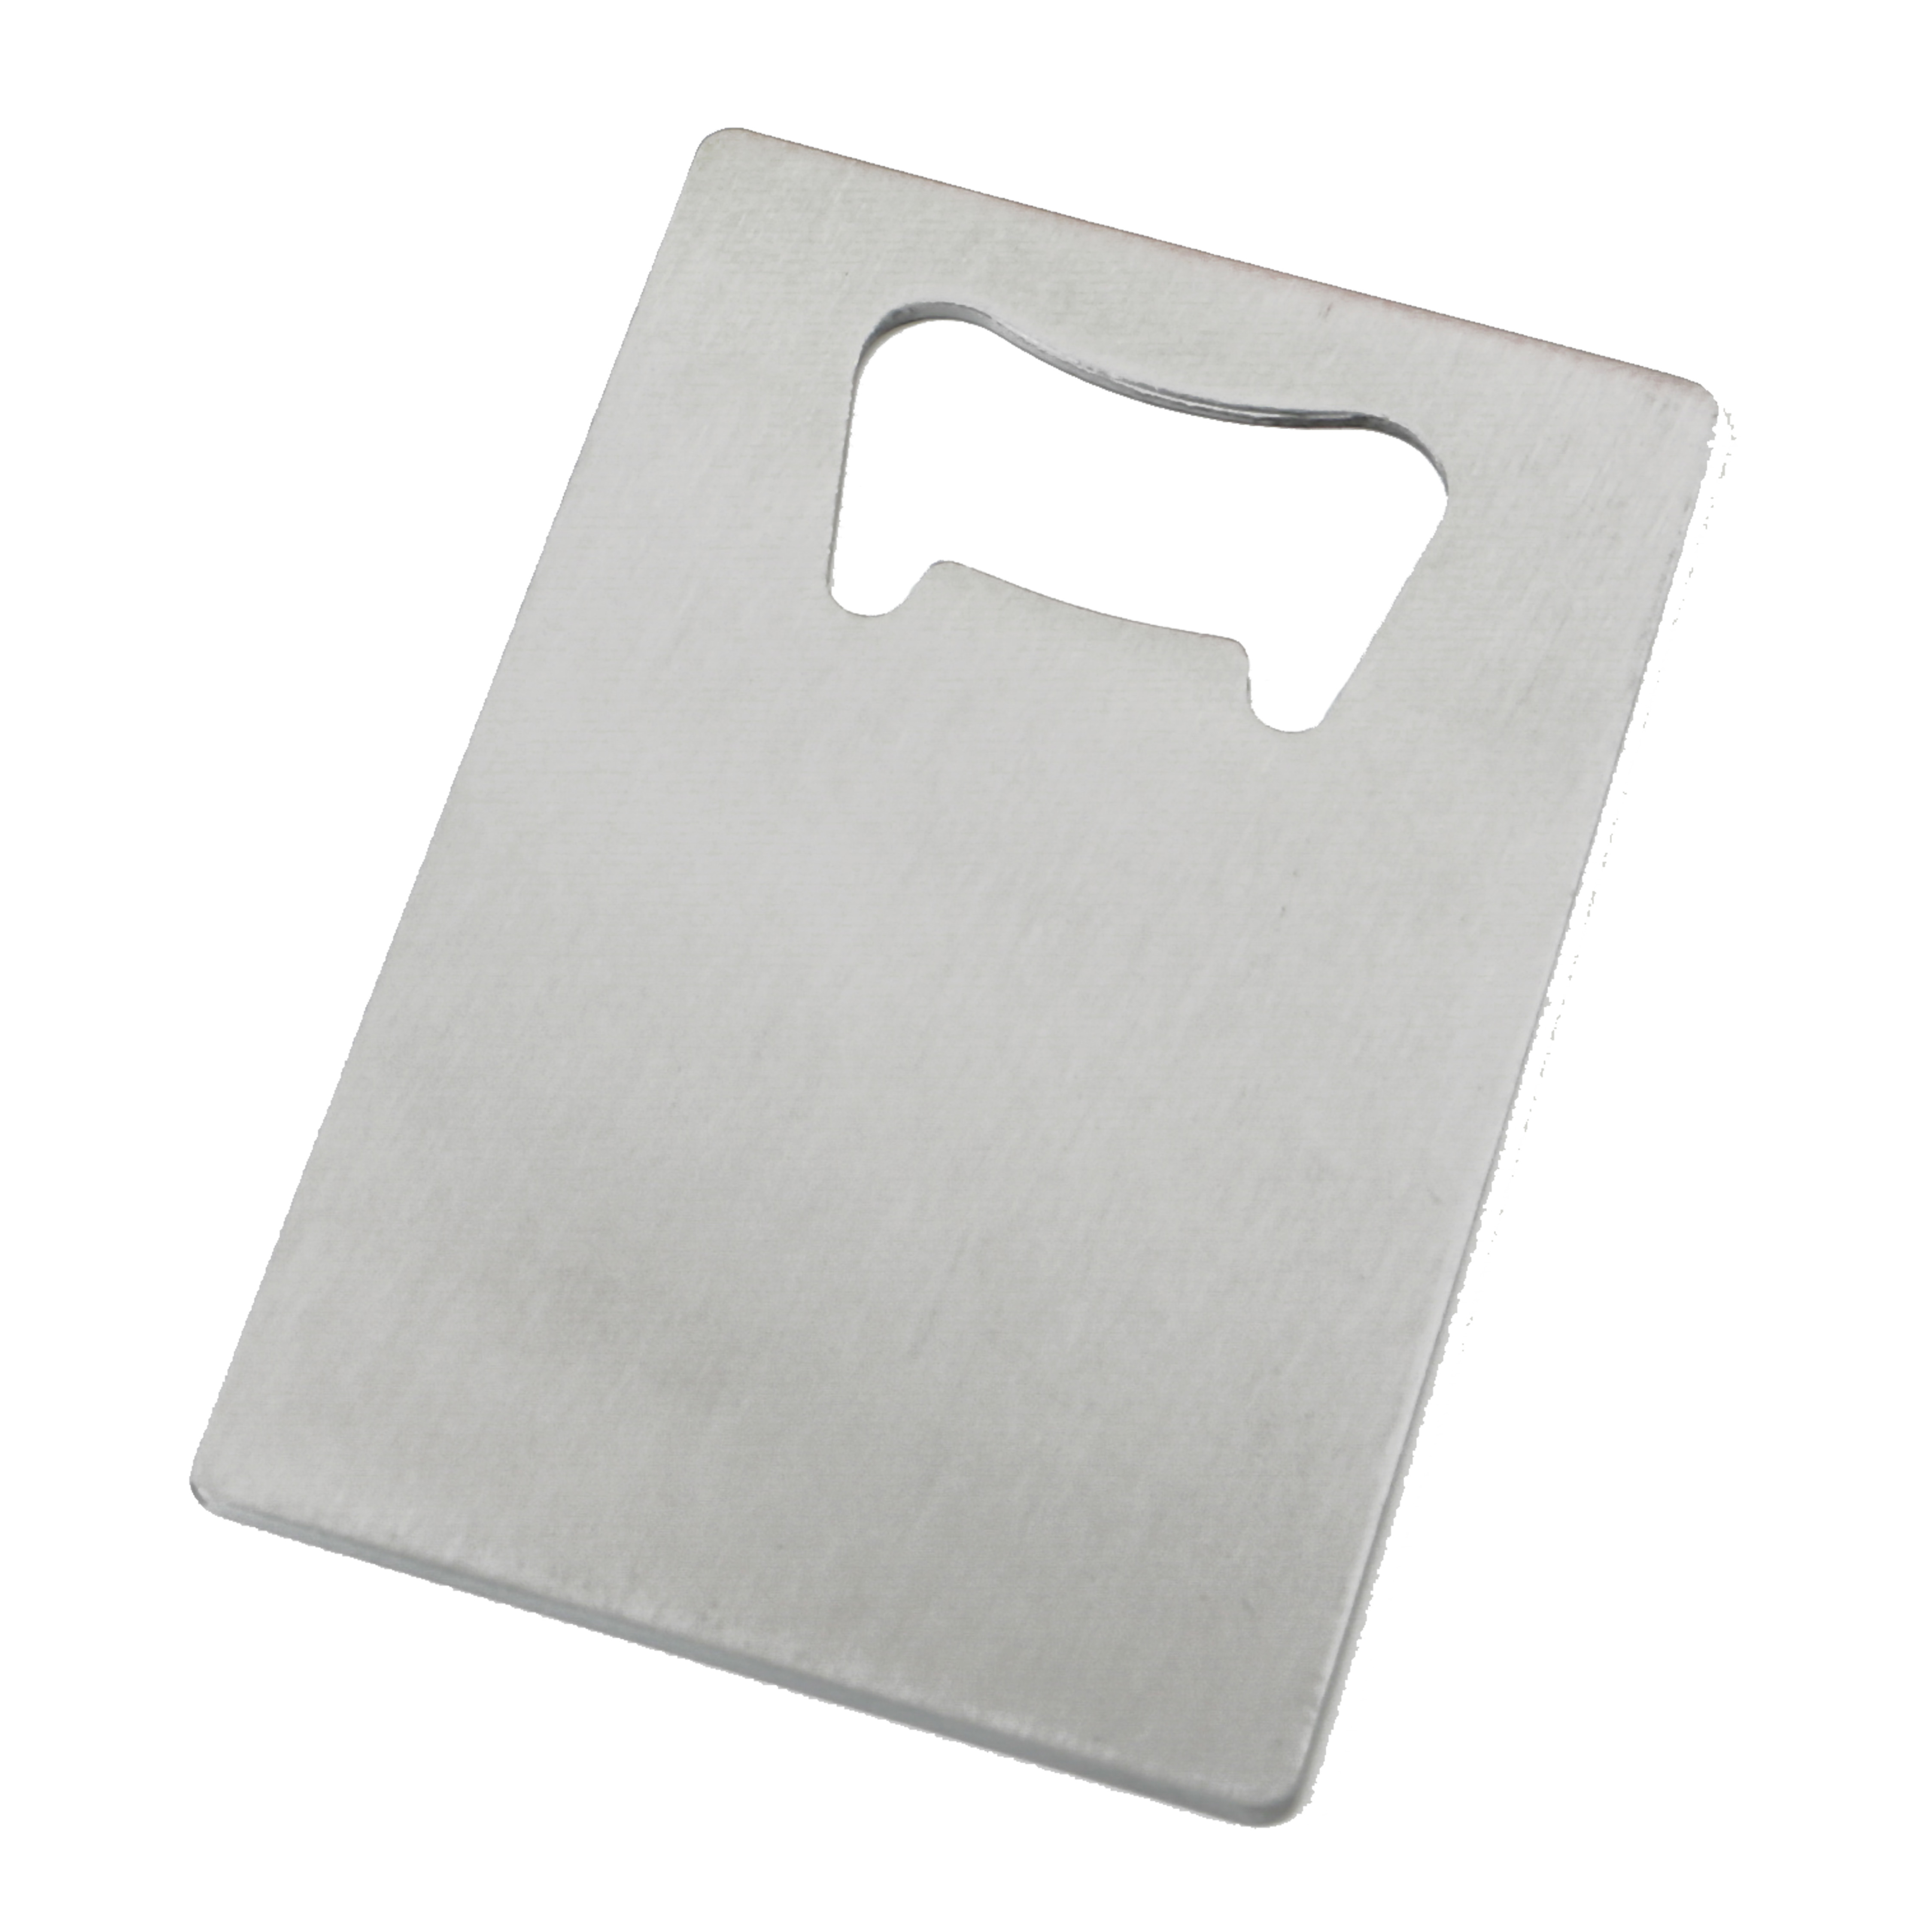 200 Perfectly Plain Collection - Credit Card stainless steel bottle opener - image 1 of 5